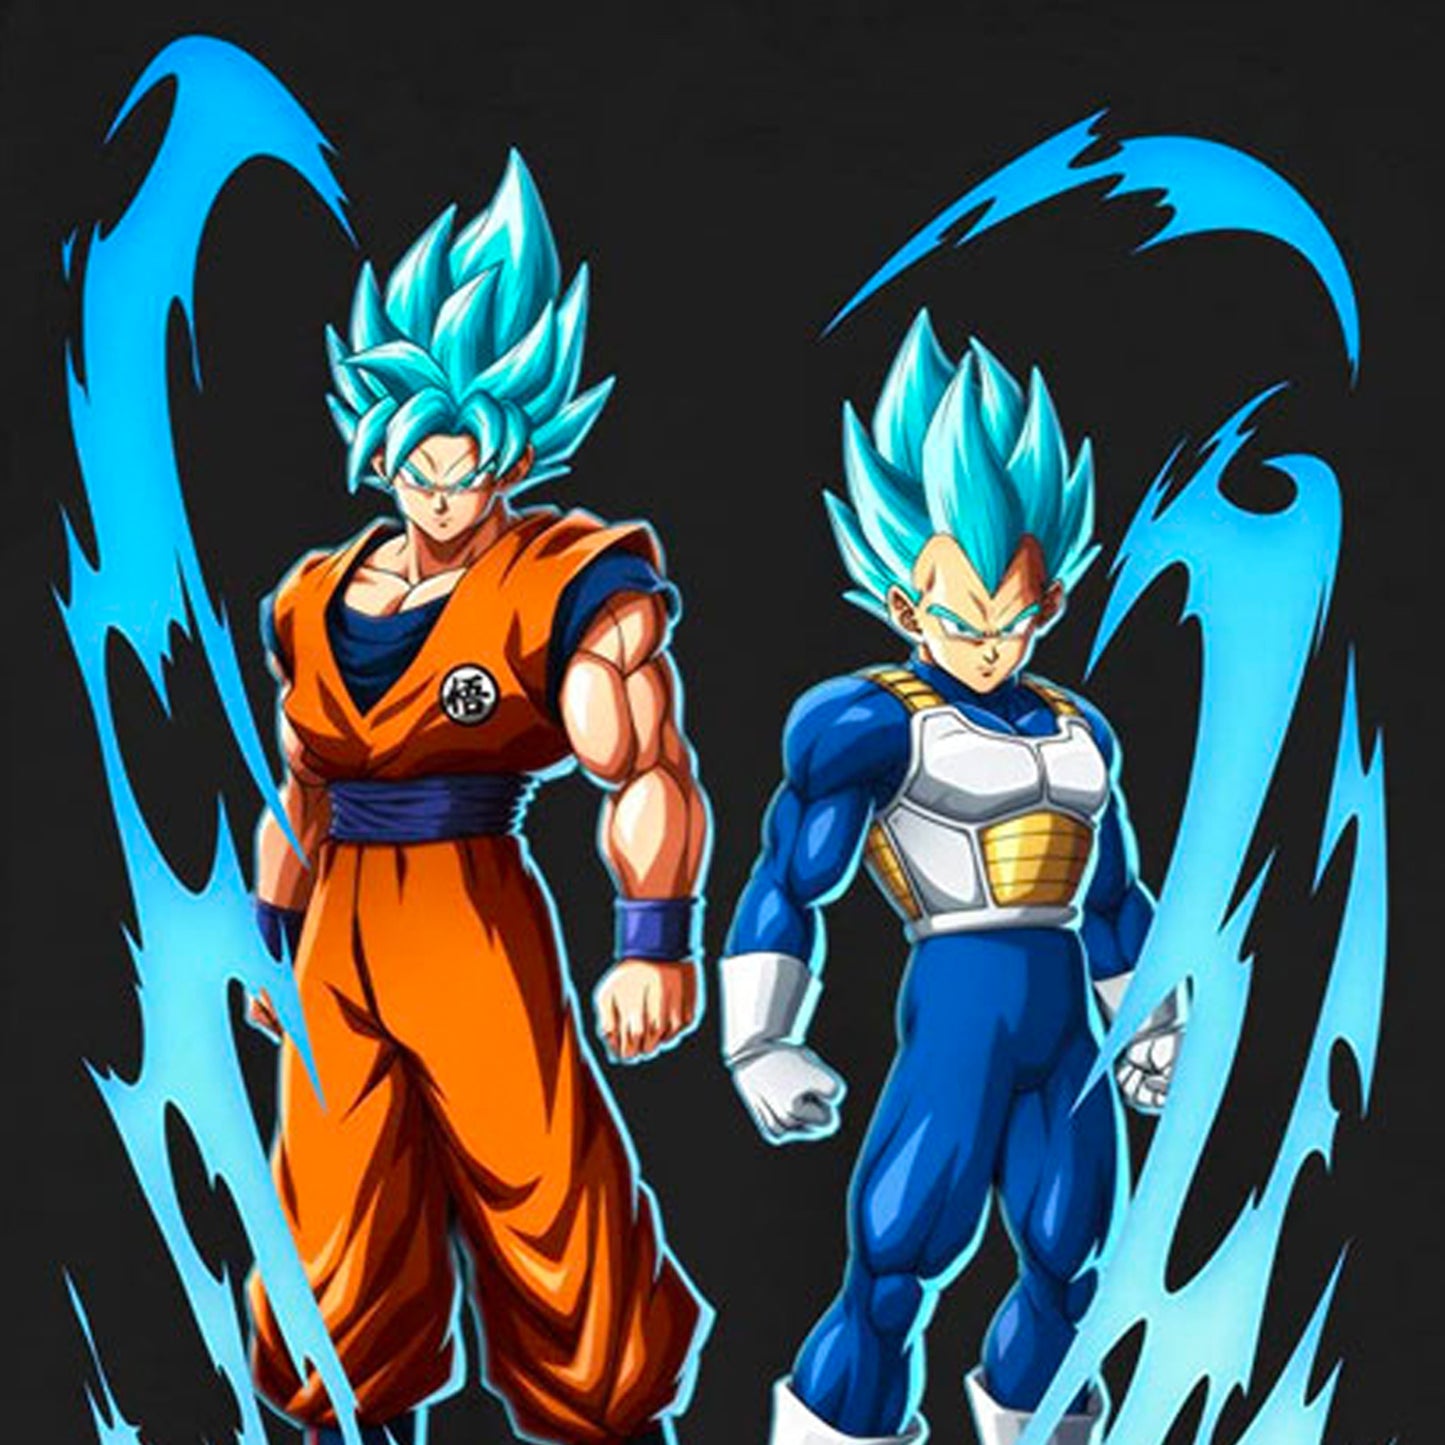 Goku and Vegeta Outfits for my Upcoming DBZ Game - Creations